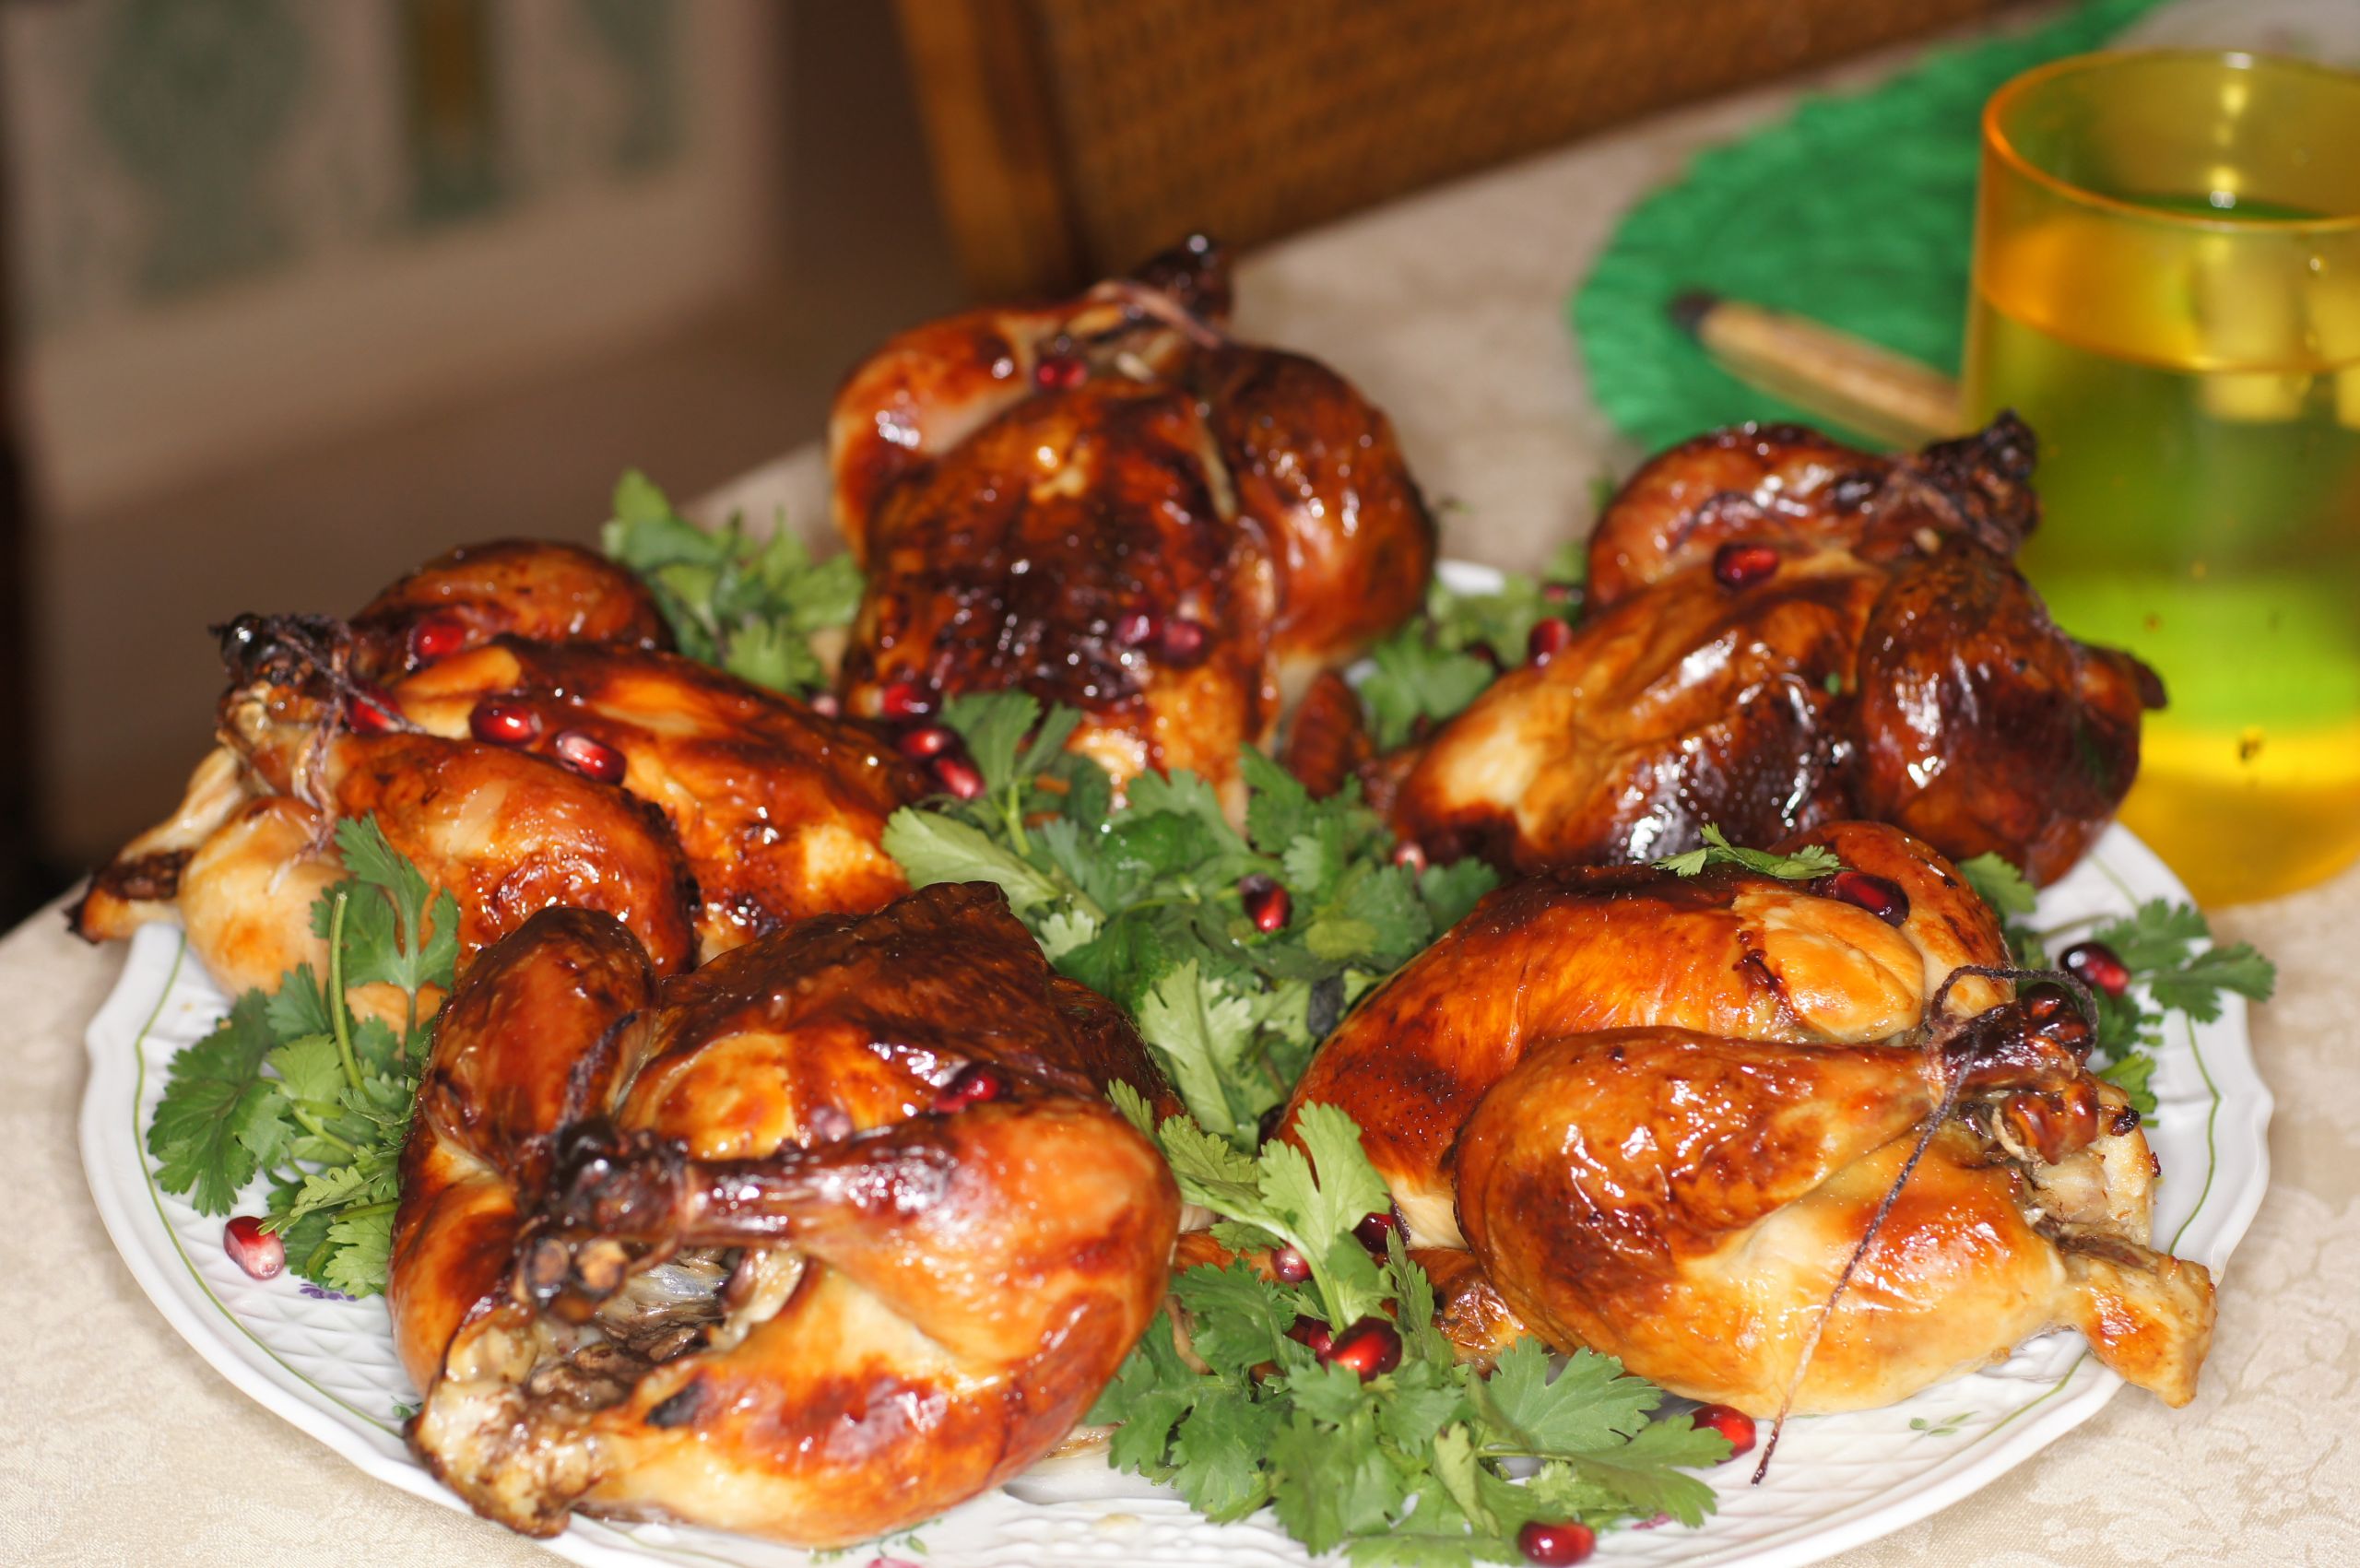 Cornish Game Hens Recipe
 Roasted Brined Cornish Game Hens with Pomegranate Sauce